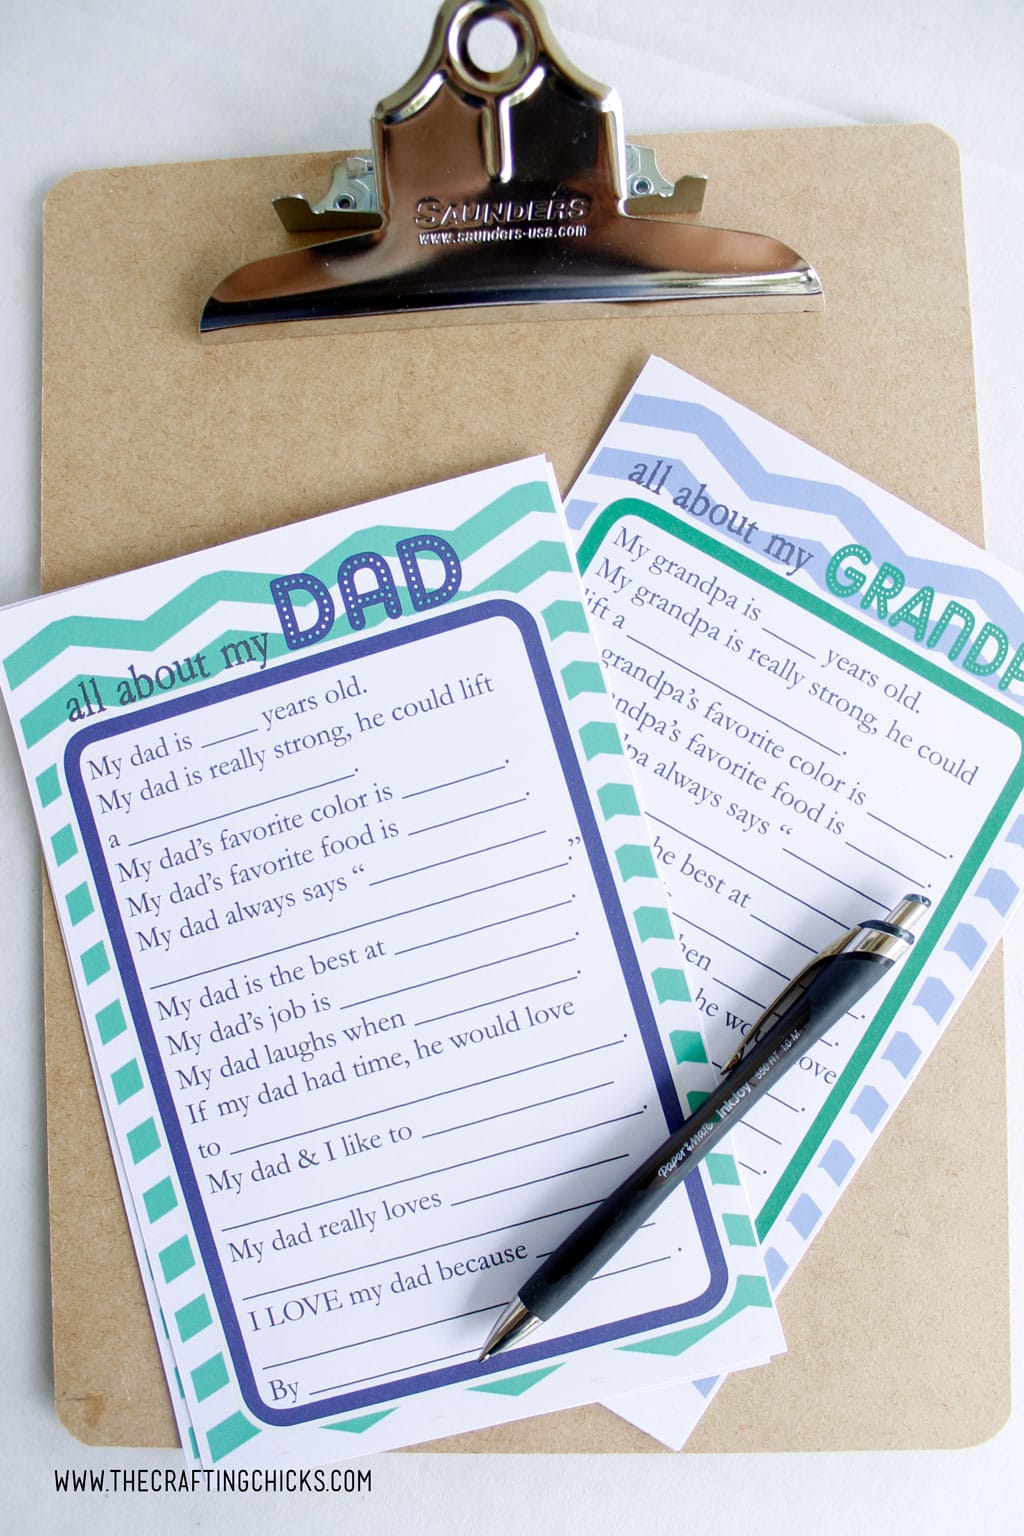 Dad and Grandpa Questionnaire for kids to fill out for Father's Day. Free Printable on clipboard with pen.